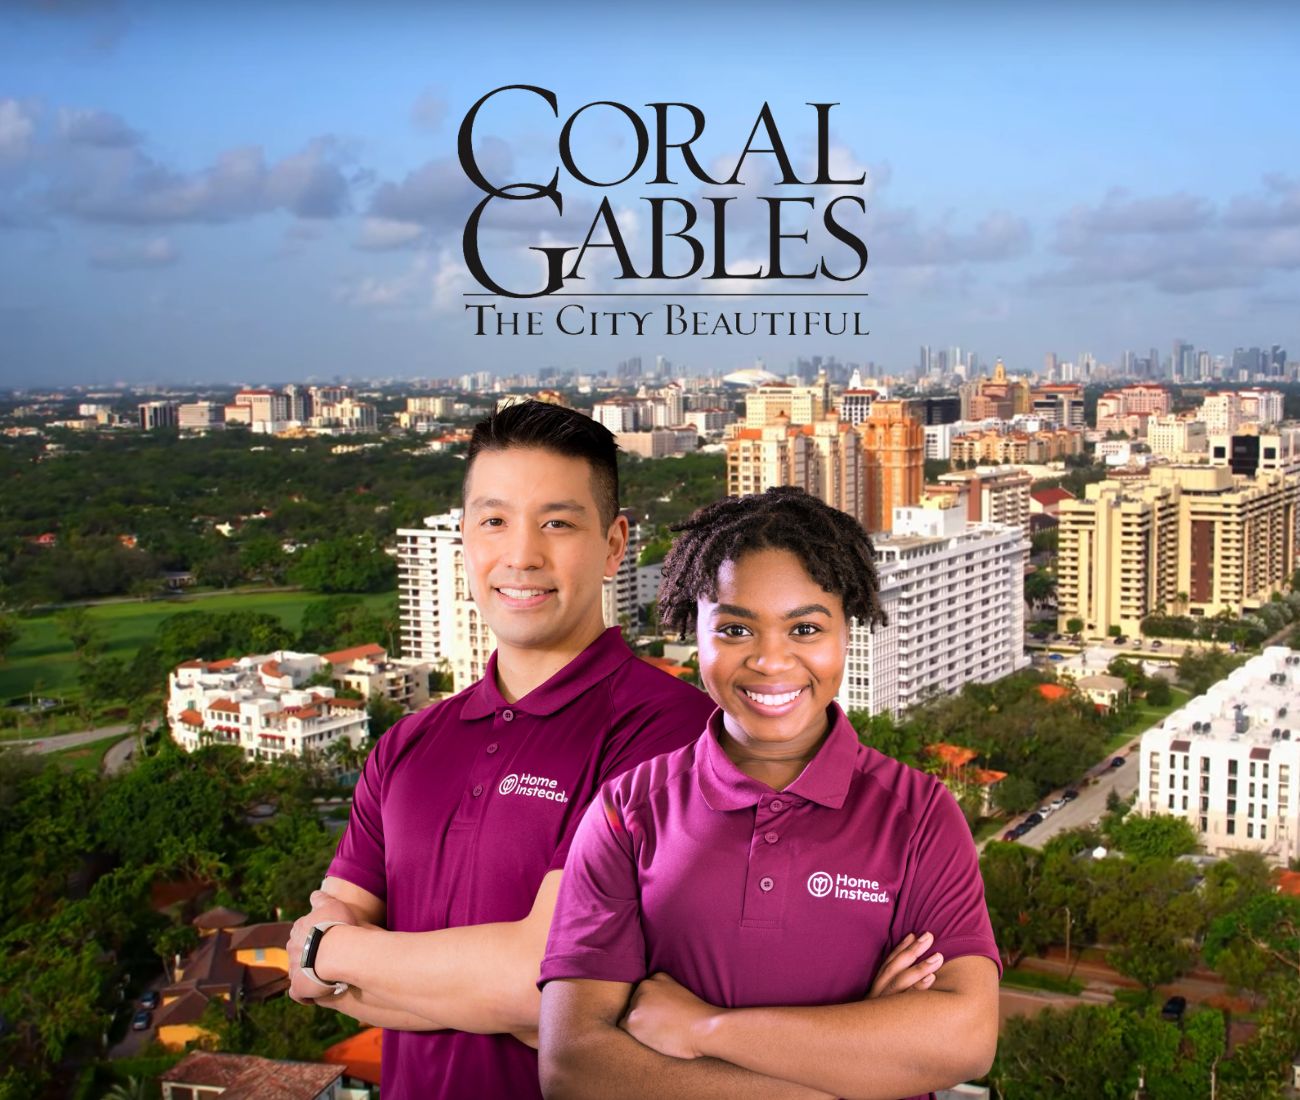 Home Instead caregivers with Coral Gables, Florida in the background